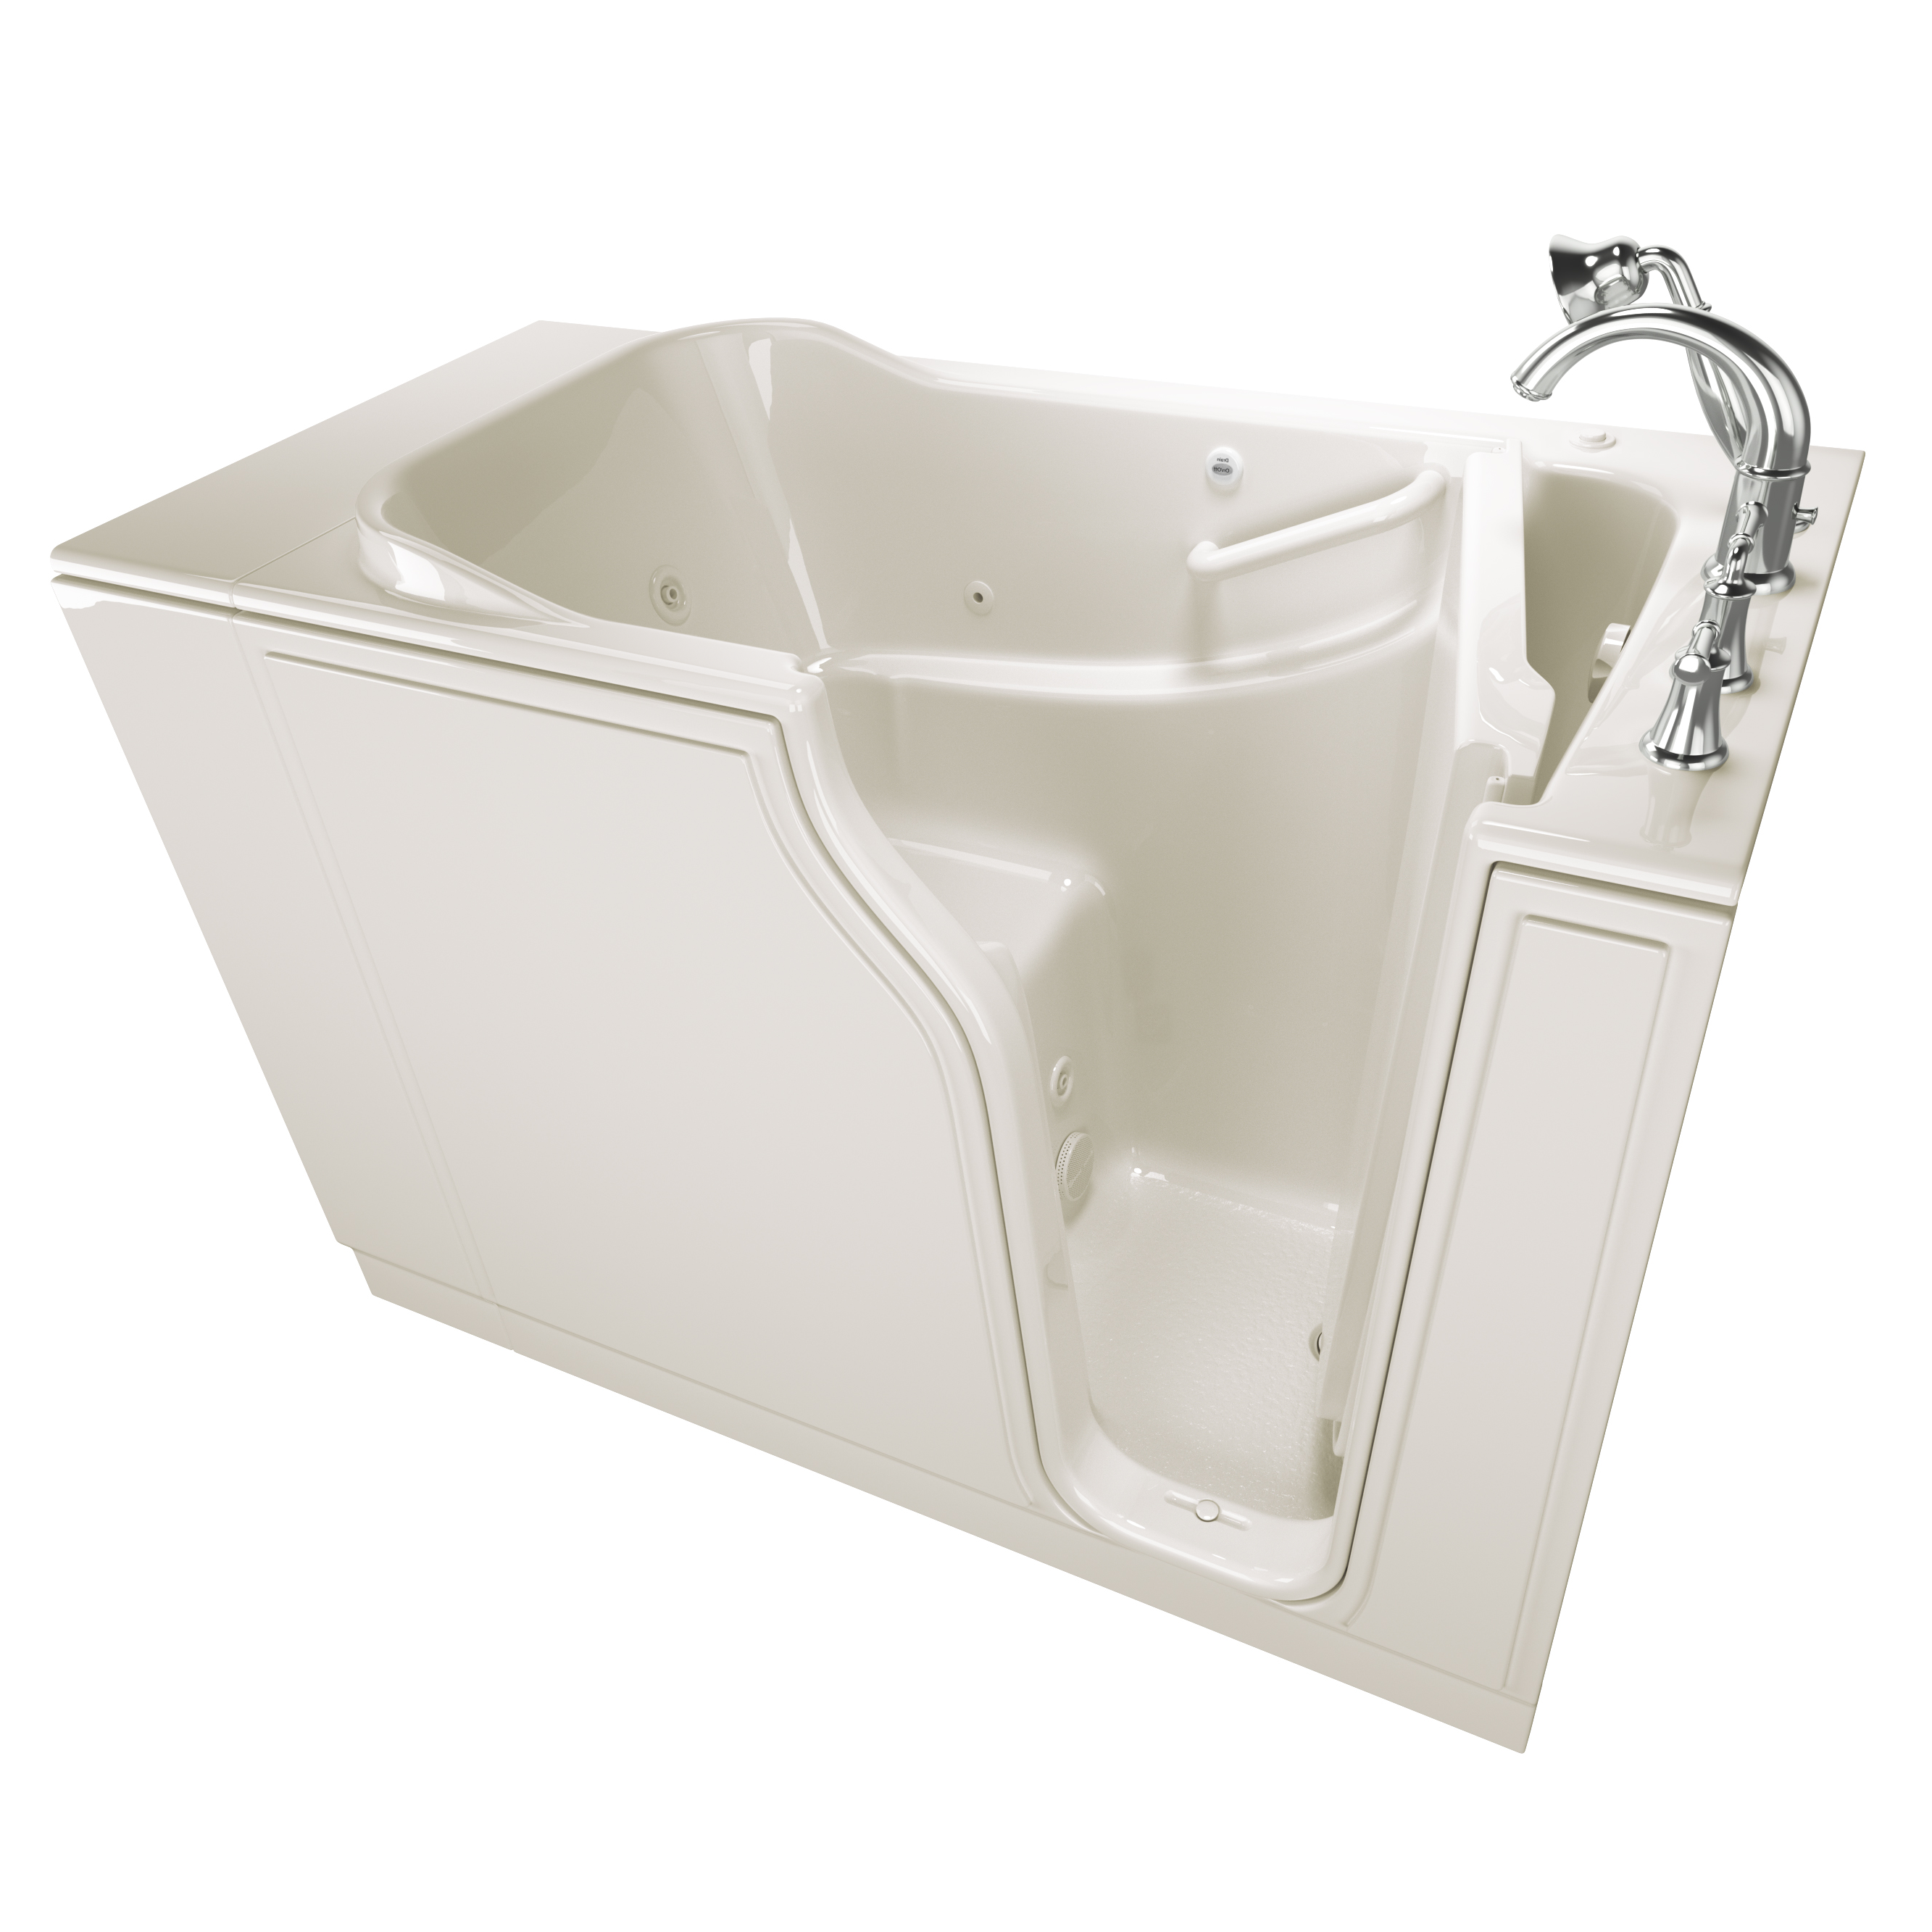 Gelcoat Value Series 30 x 52  Inch Walk in Tub With Whirlpool System   Right Hand Drain With Faucet WIB LINEN